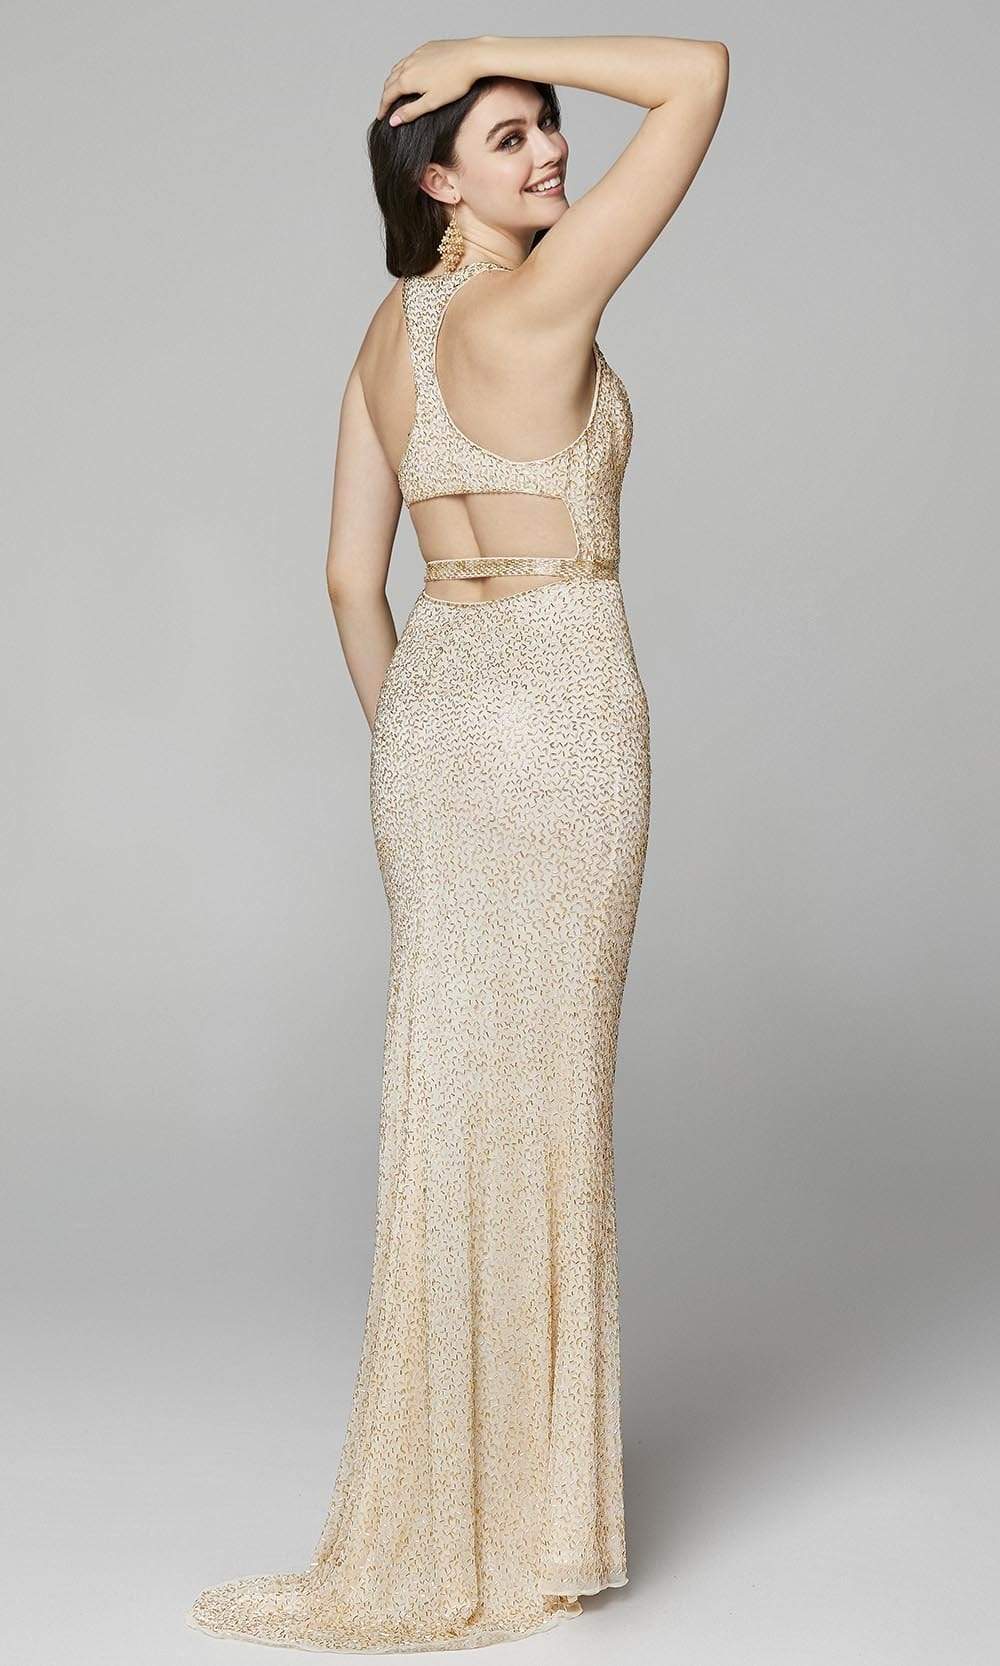 Primavera Couture - 3635 Beaded Deep V Neck Dress With Slit and Train Prom Dresses